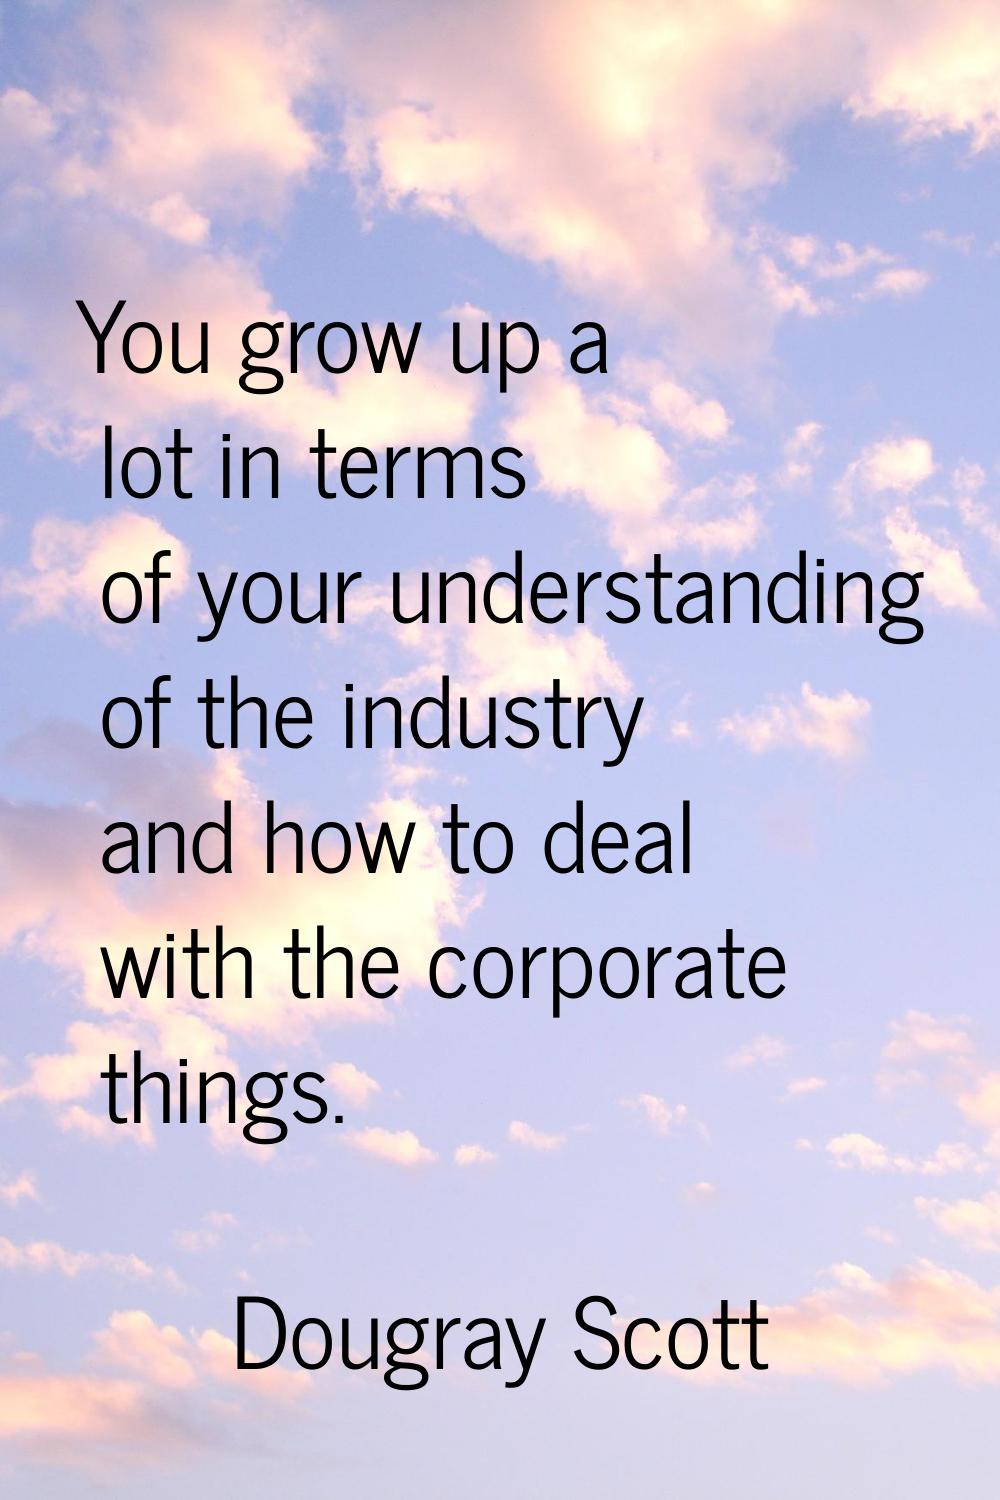 You grow up a lot in terms of your understanding of the industry and how to deal with the corporate